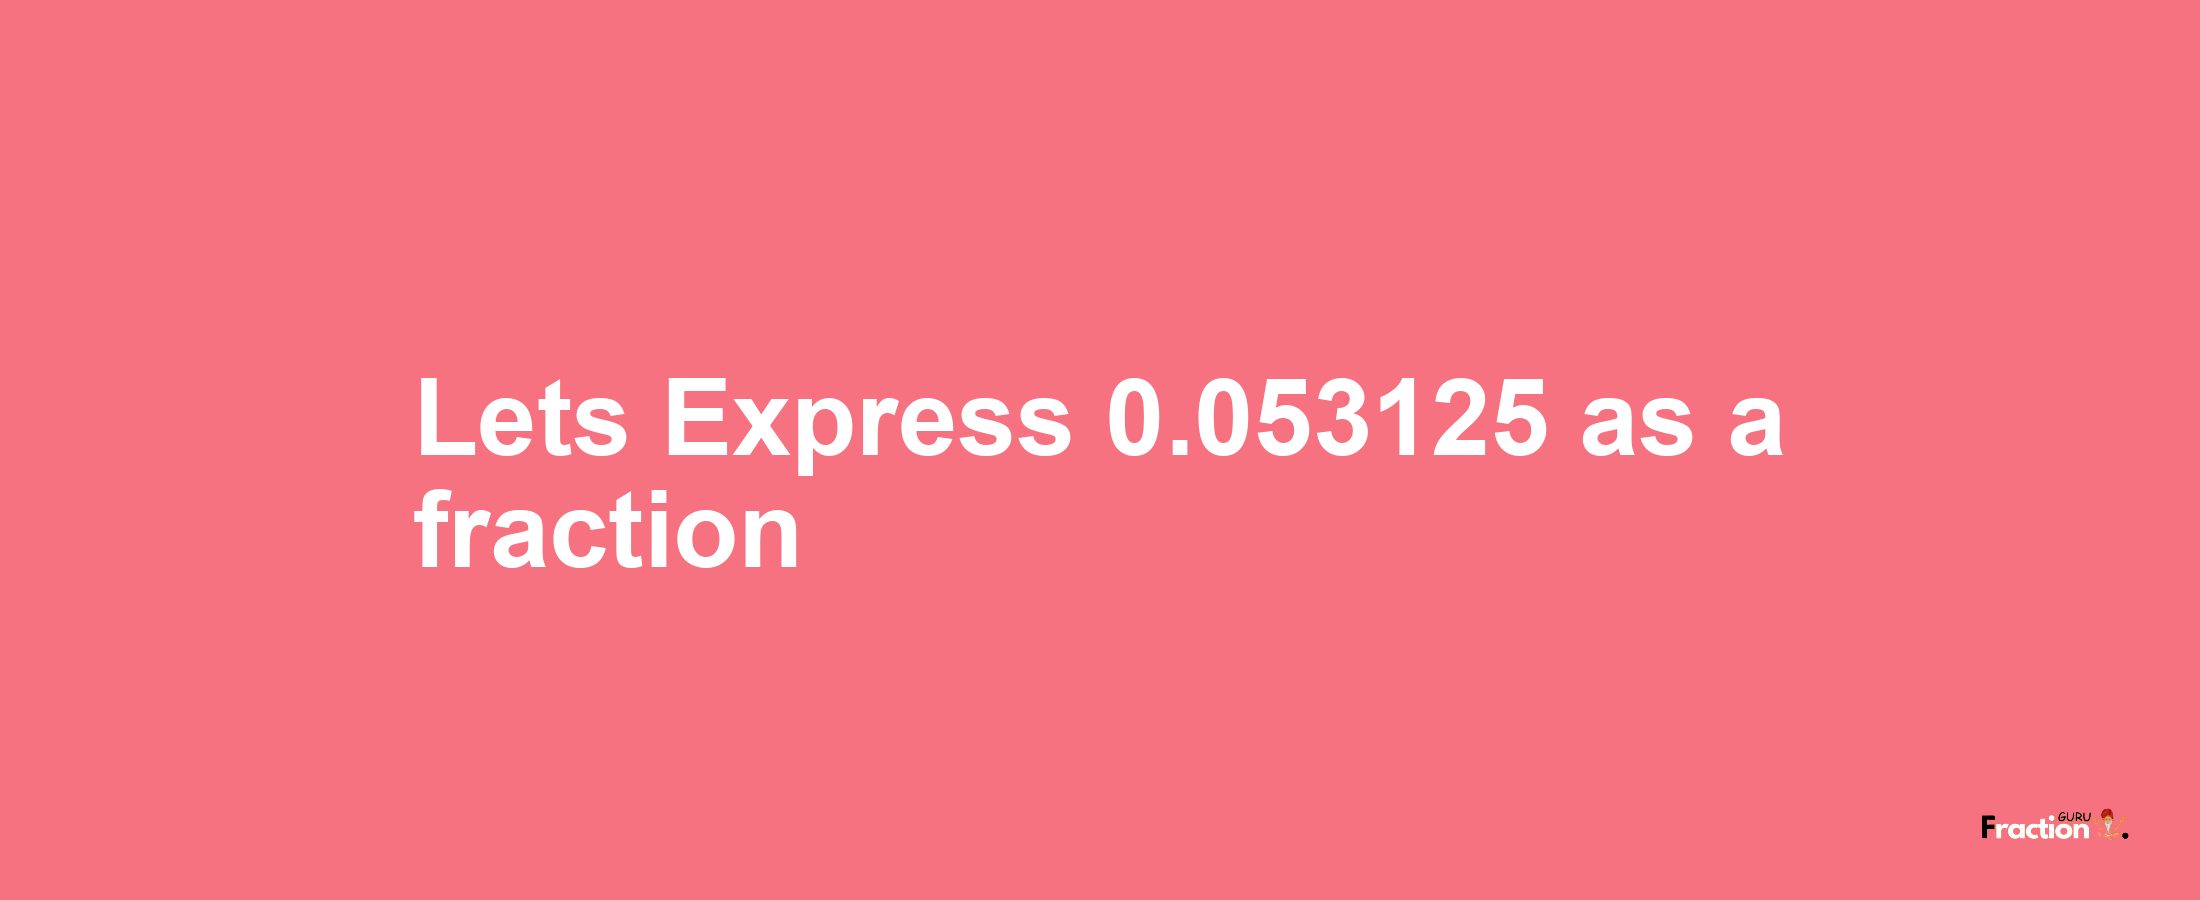 Lets Express 0.053125 as afraction